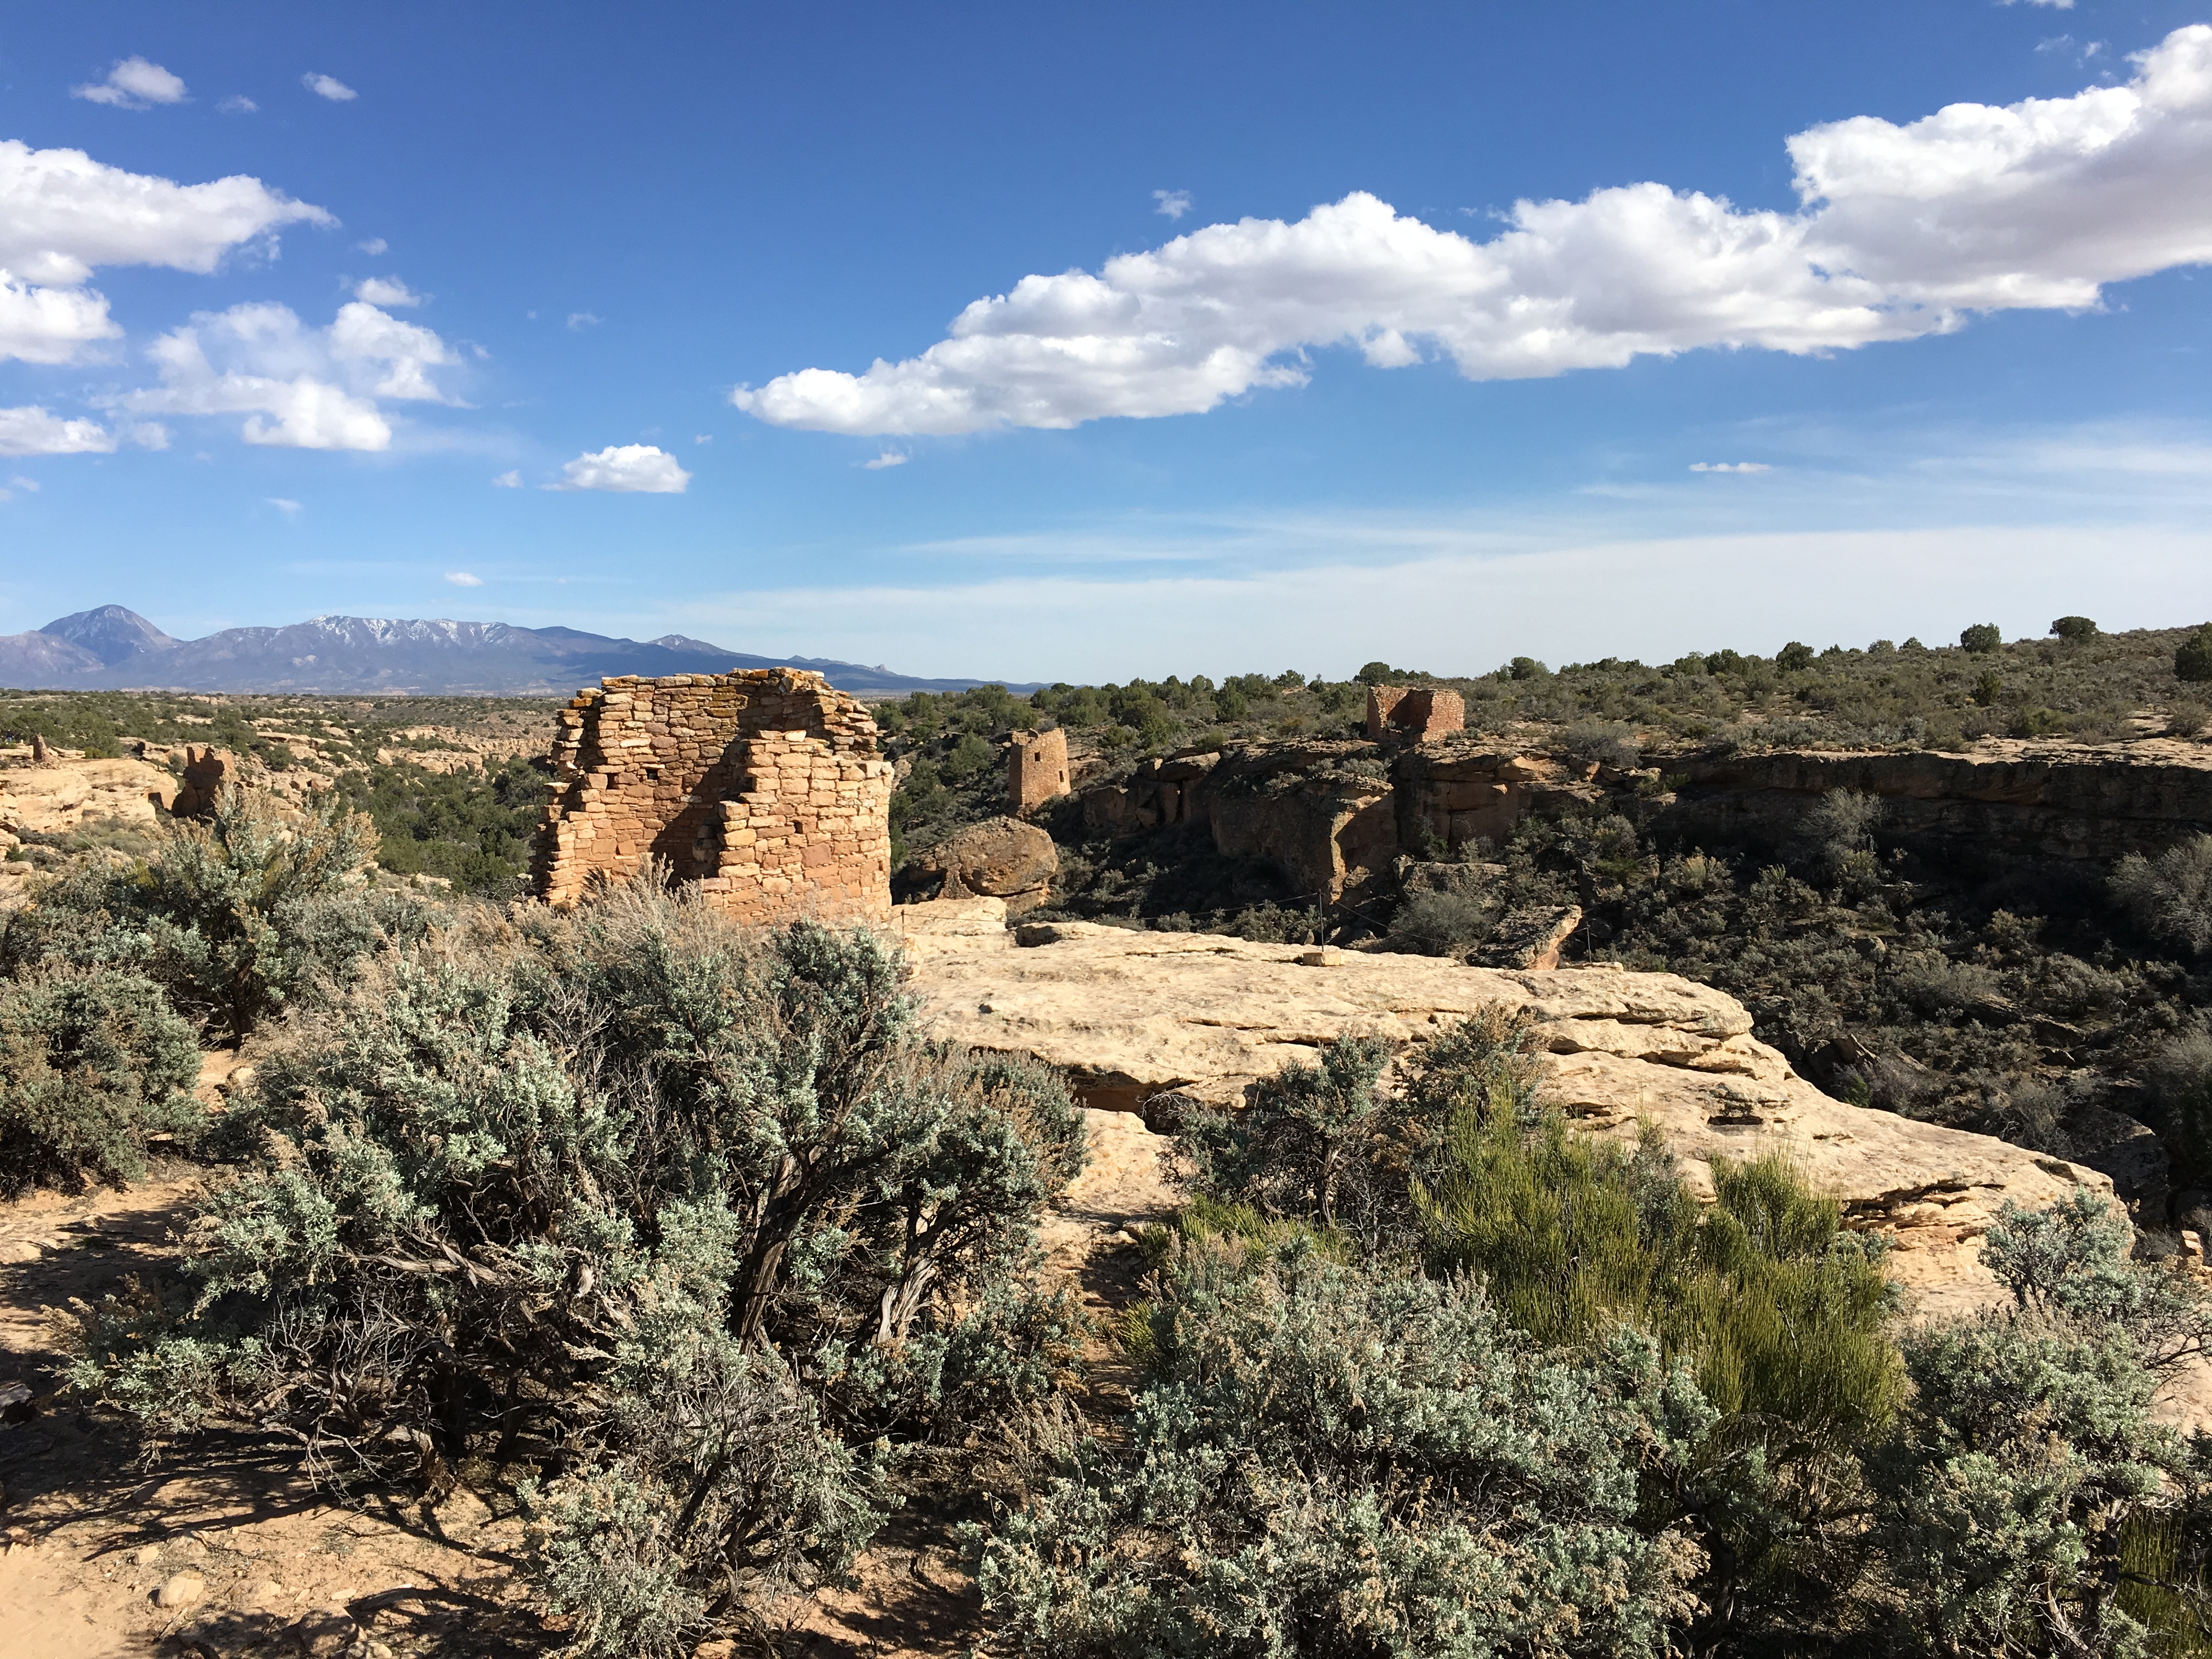 10 Activities You’ll Miss If You Drive Straight Through Mesa Verde Country